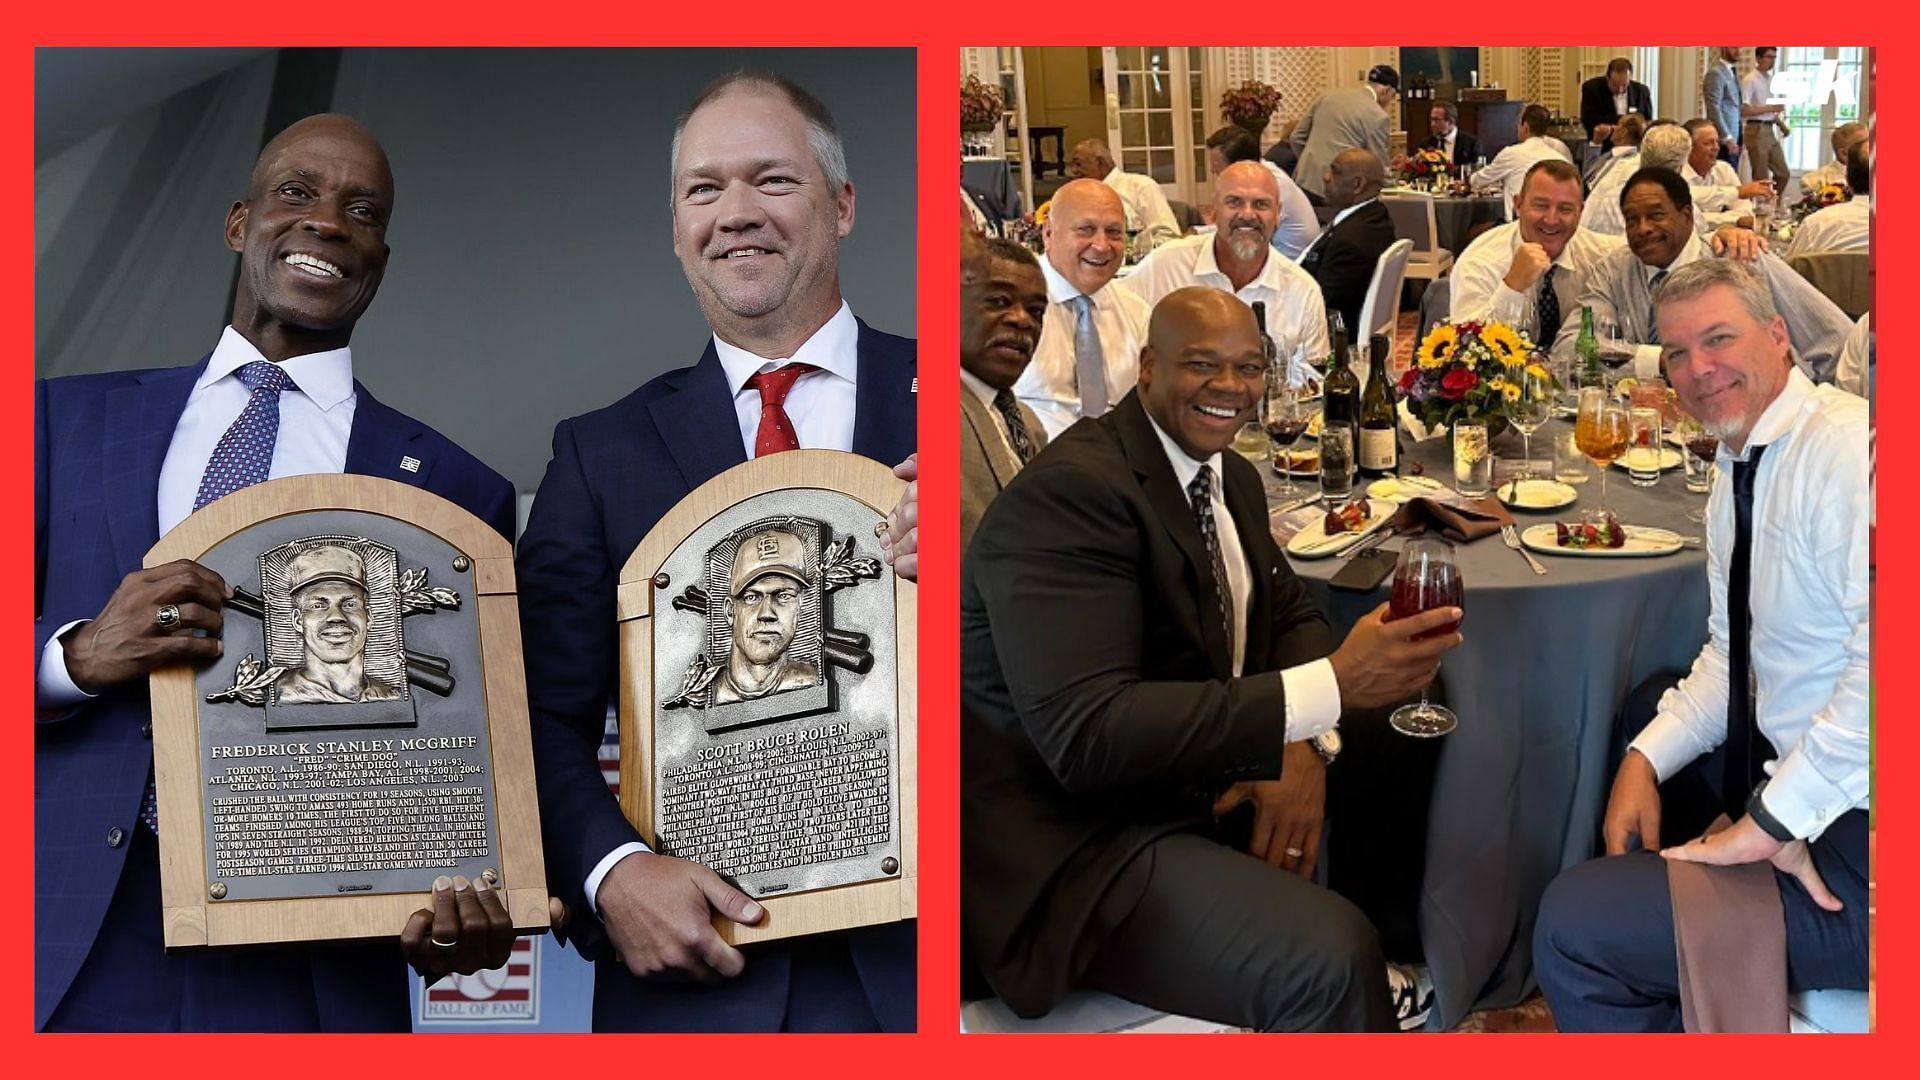 In Photos: 4,507 home runs in one picture as MLB Hall of Famers